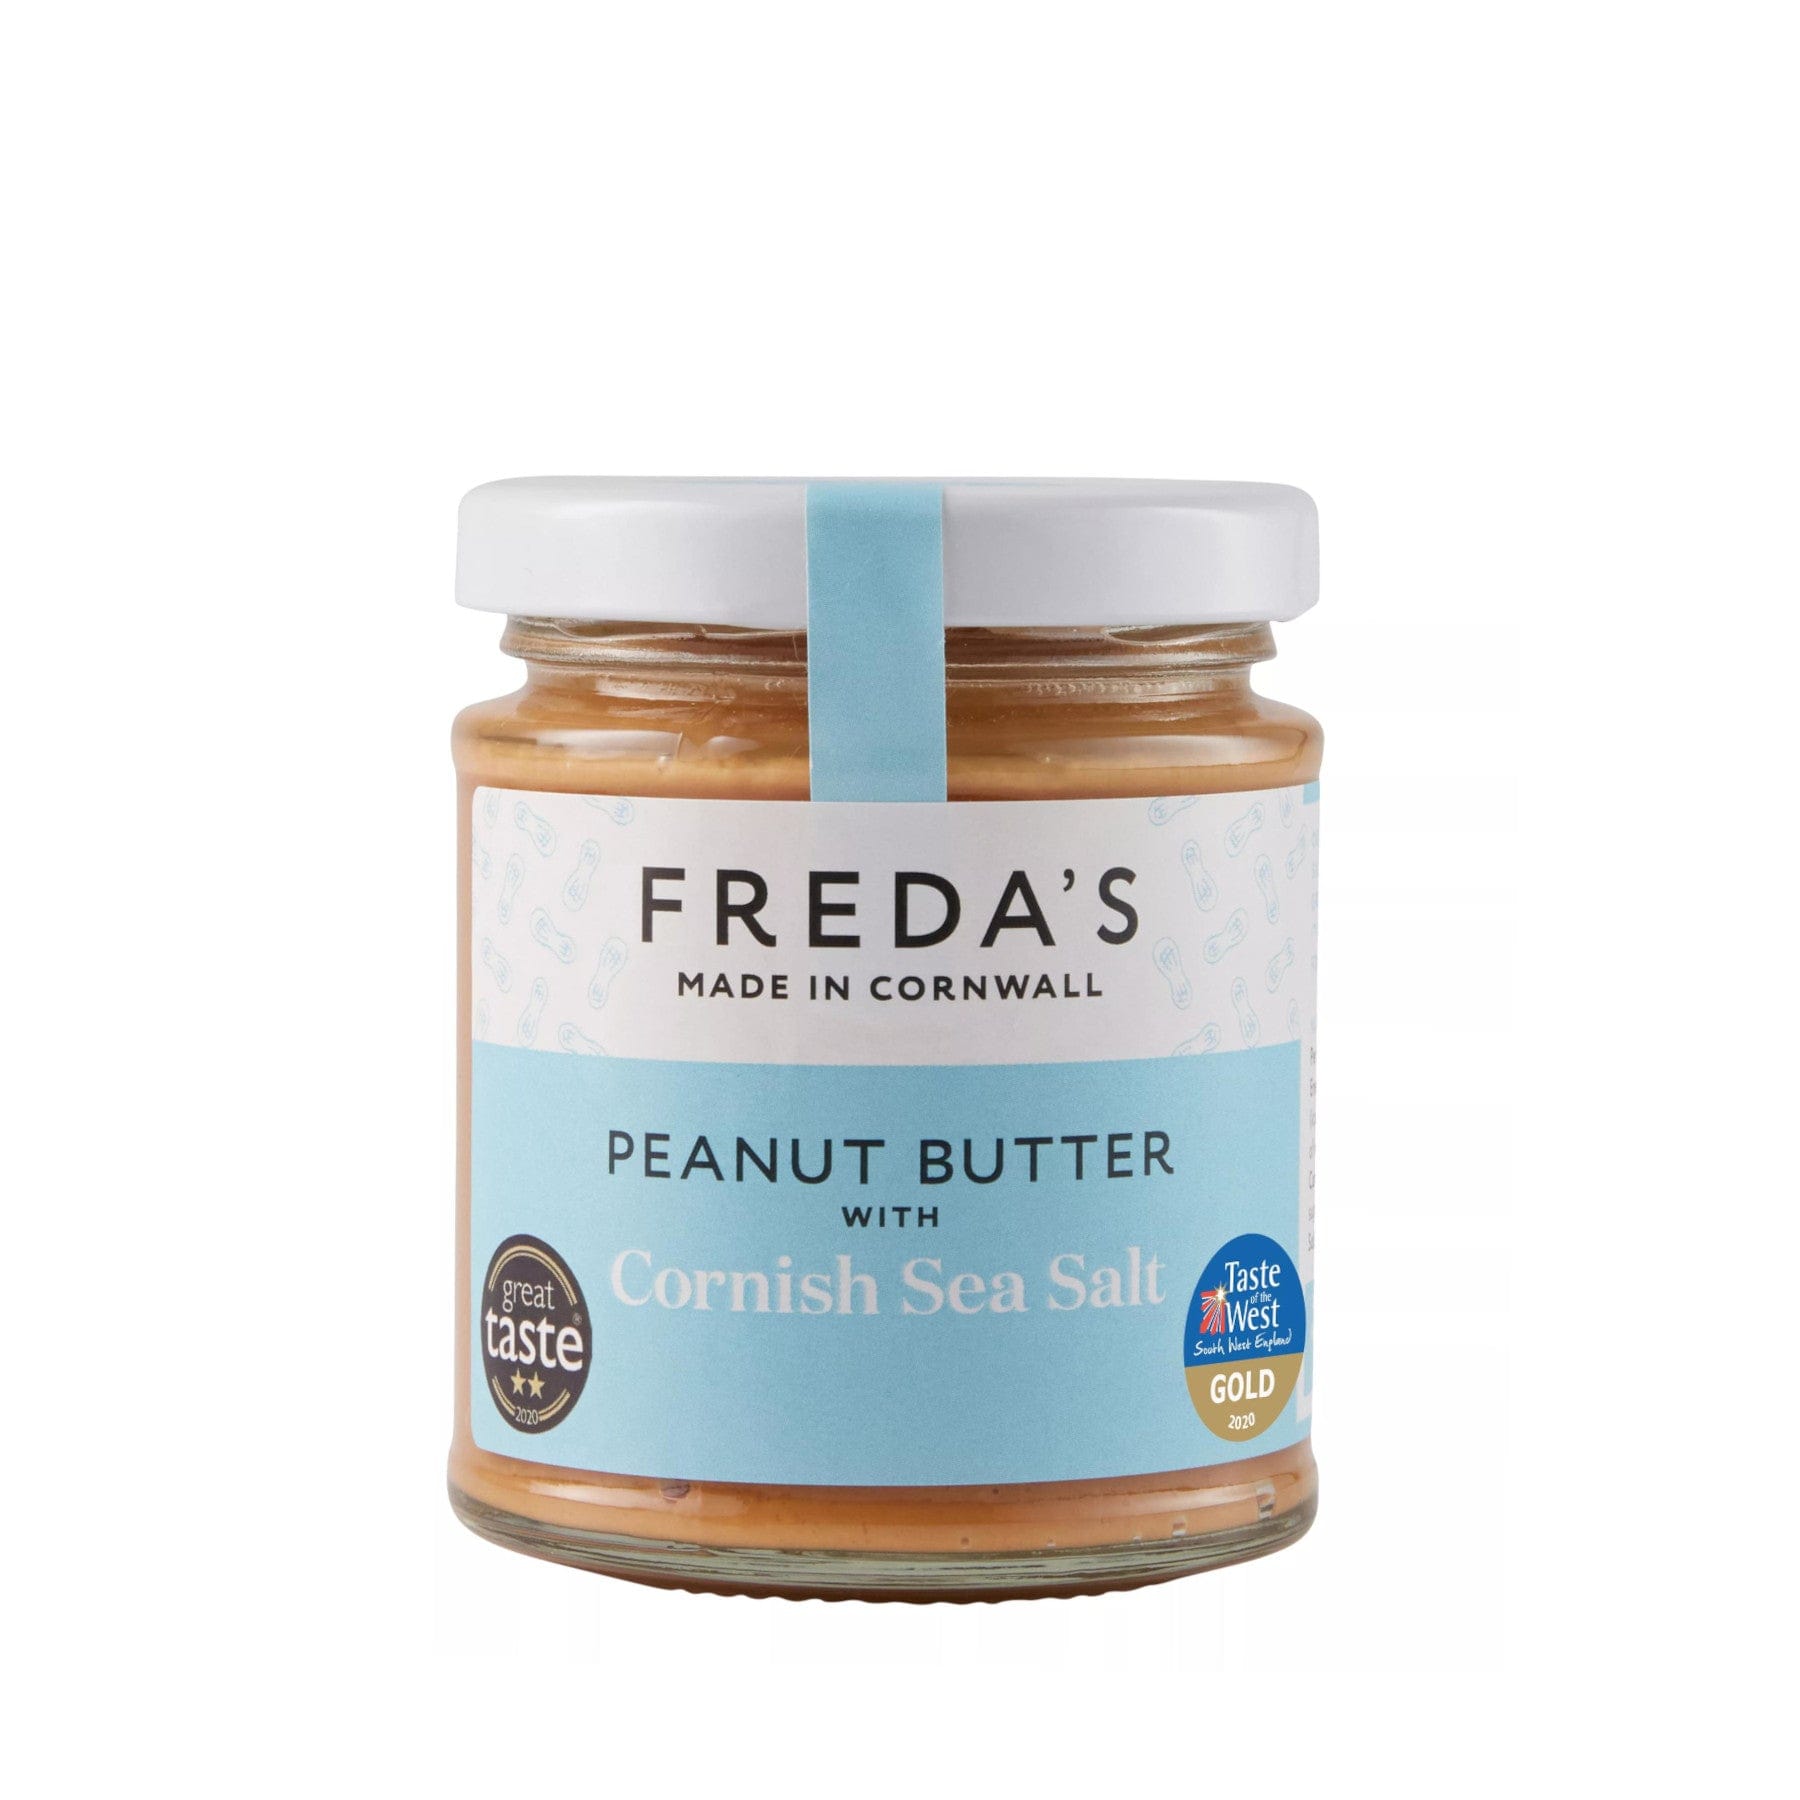 Freda's Peanut Butter with Cornish Sea Salt in a glass jar, made in Cornwall, featuring Great Taste and Taste of the West Gold 2018 awards badges.